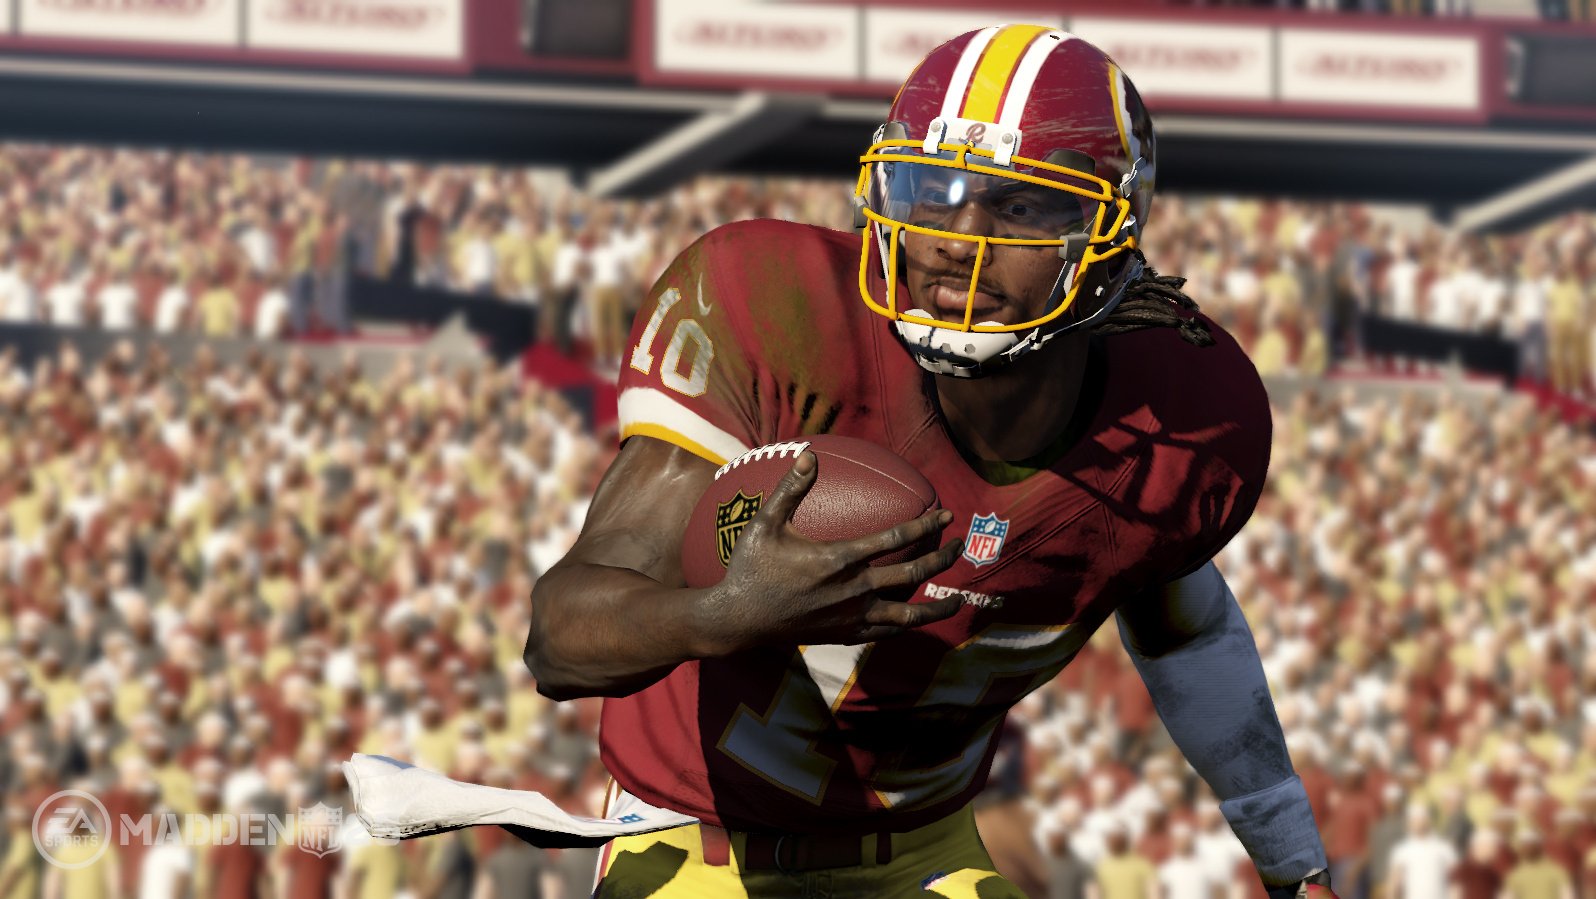 Madden NFL 25 (PS4 / PlayStation 4) Game Profile | News, Reviews